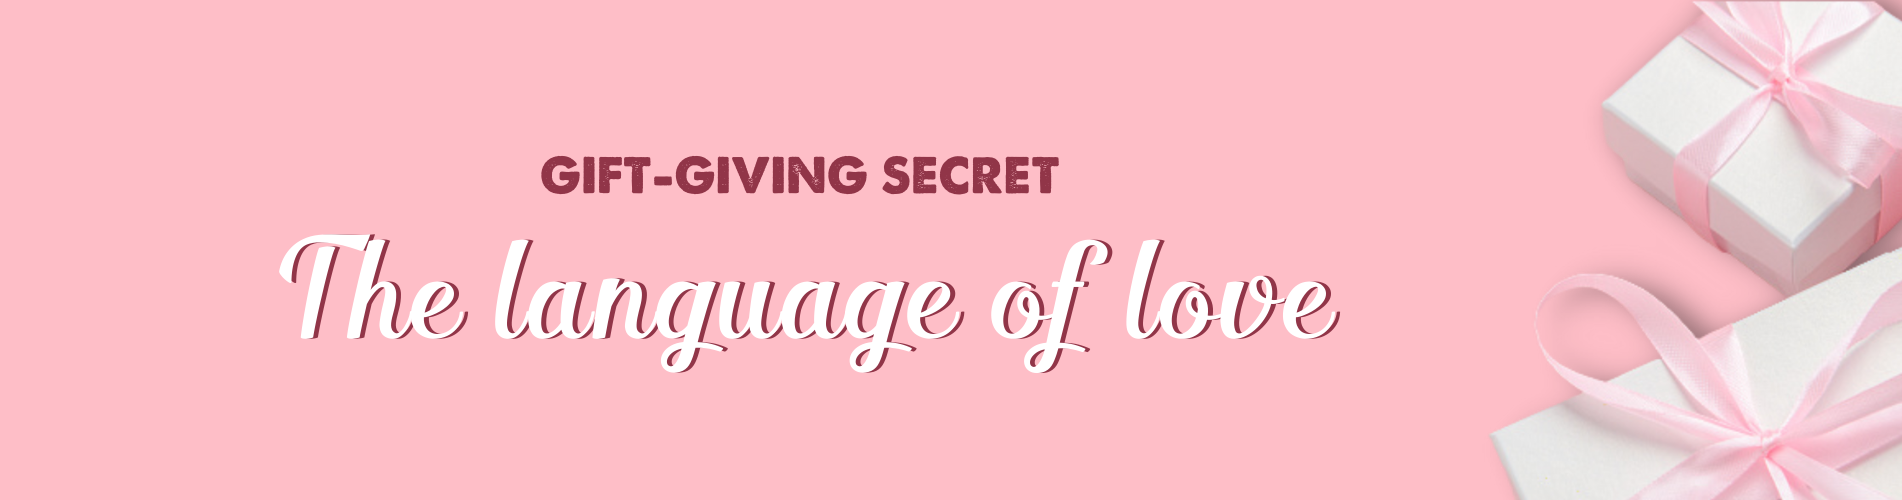 gift-giving-secret-the-language-of-love